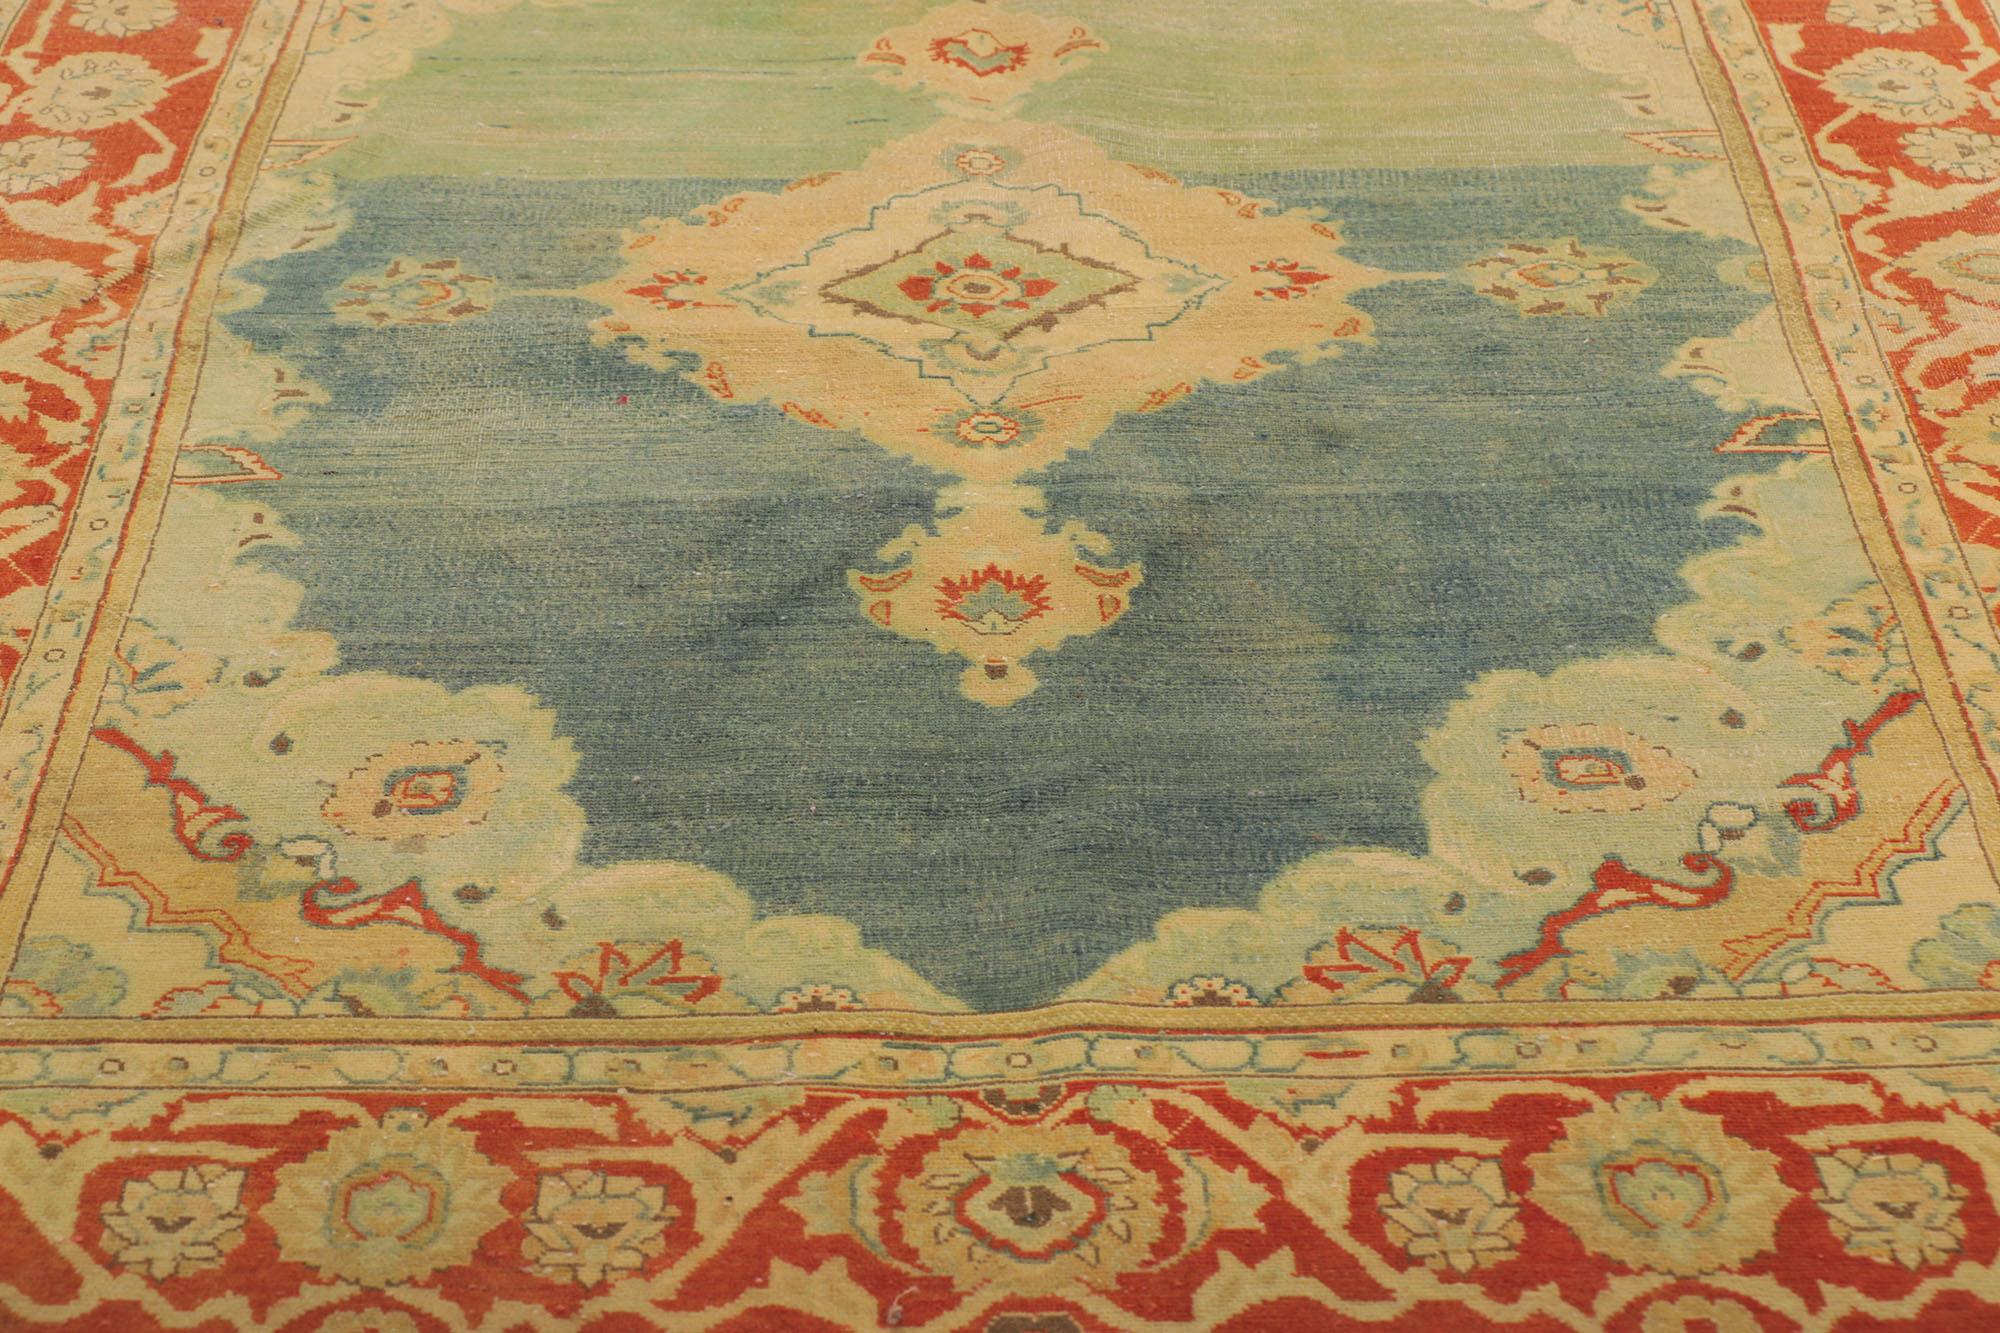 Vintage Persian Tabriz Rug with Italian Renaissance Style In Good Condition For Sale In Dallas, TX